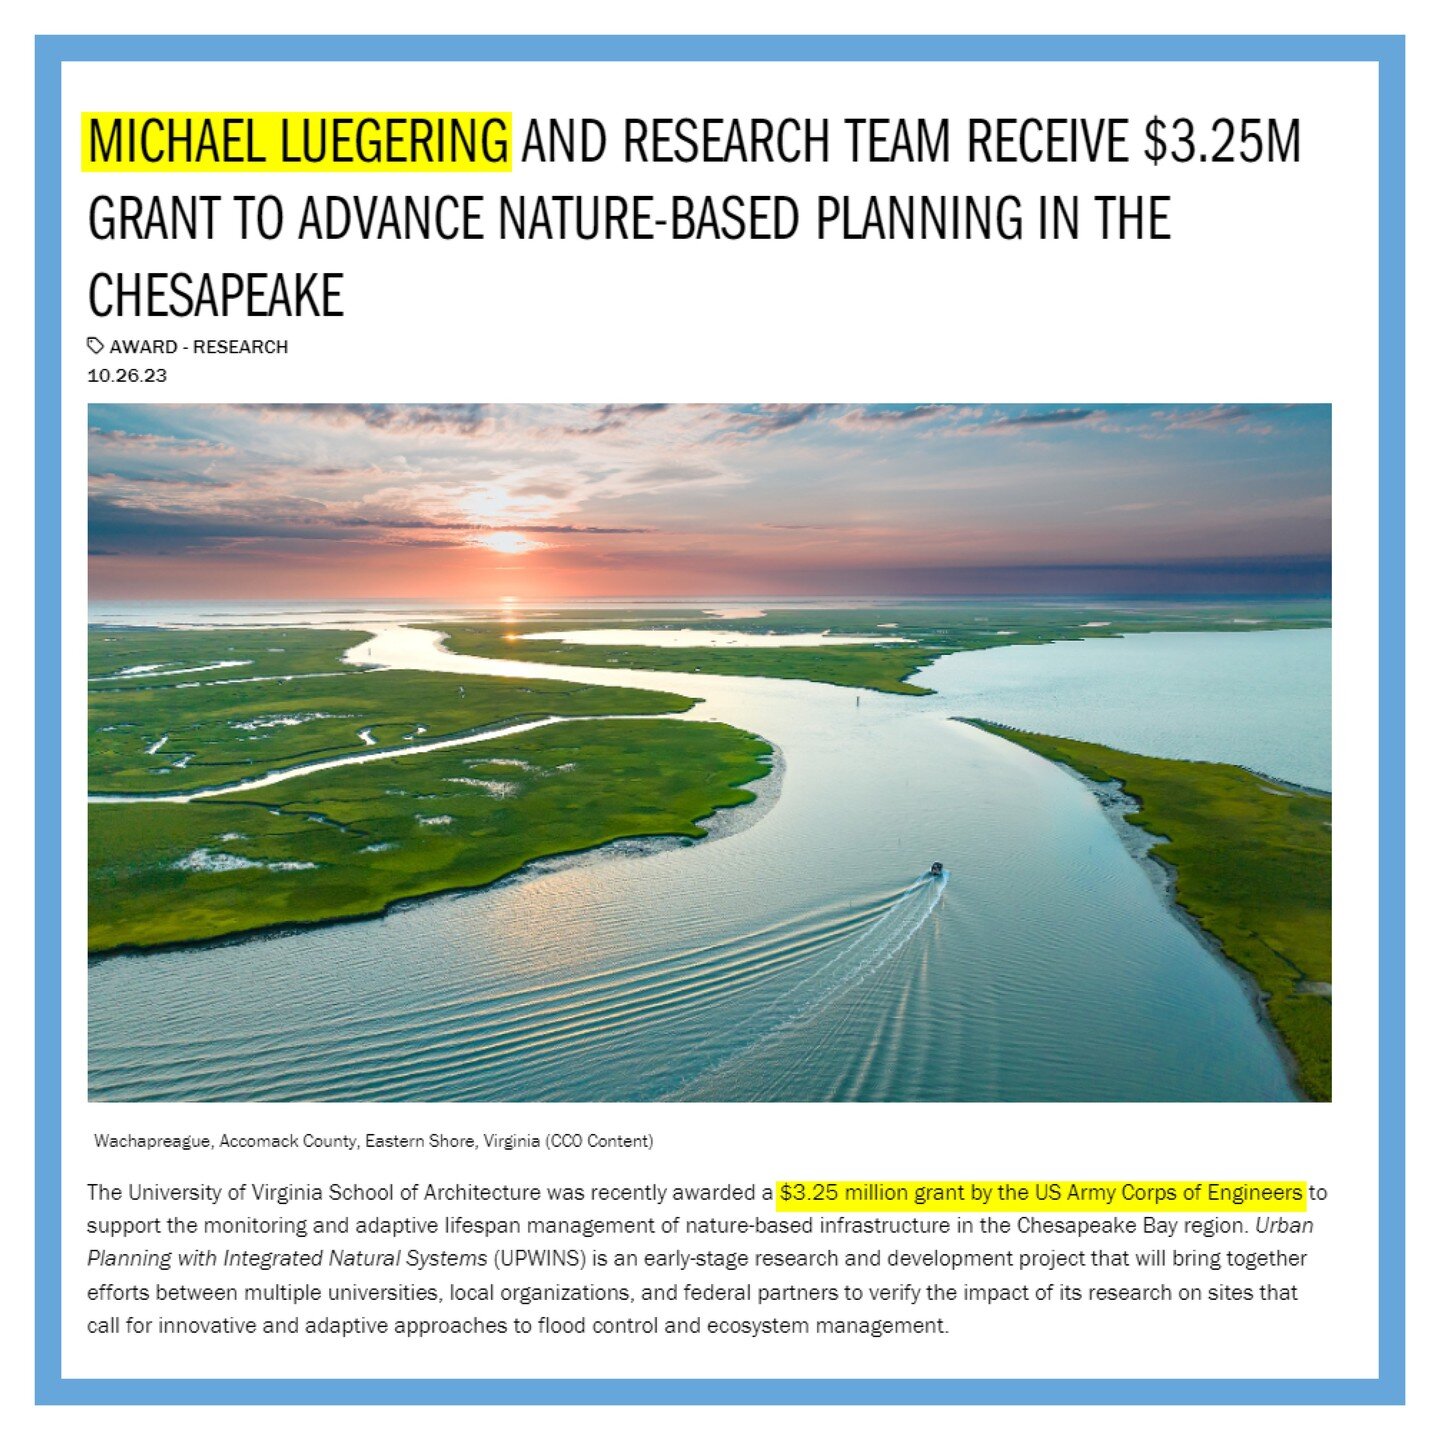 LVF is excited to share that Partner and University of Virginia Assistant Professor Michael Luegering has received a $3.25M grant from the US Army Corps of Engineers (USACE) to support his research on the monitoring and adaptive lifespan management o